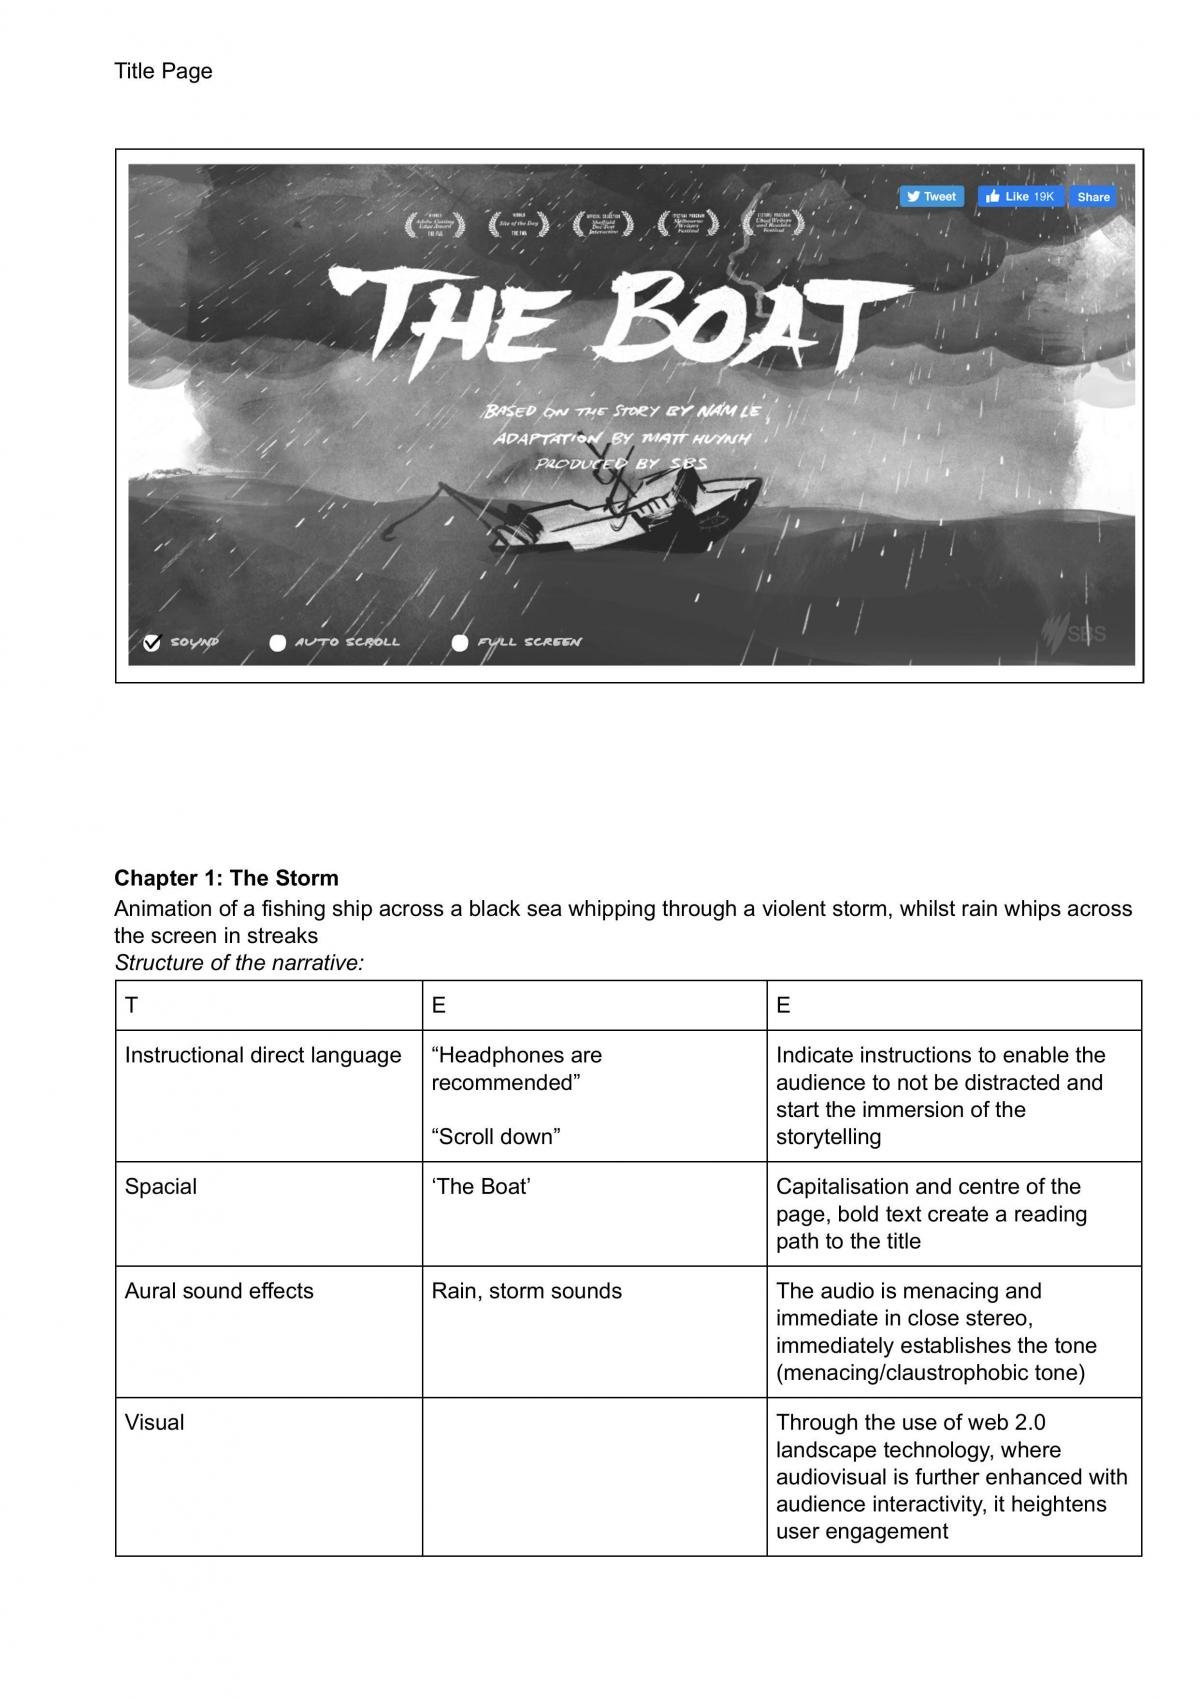 The Boat - Chapter Analysis of Complete Text  - Page 1